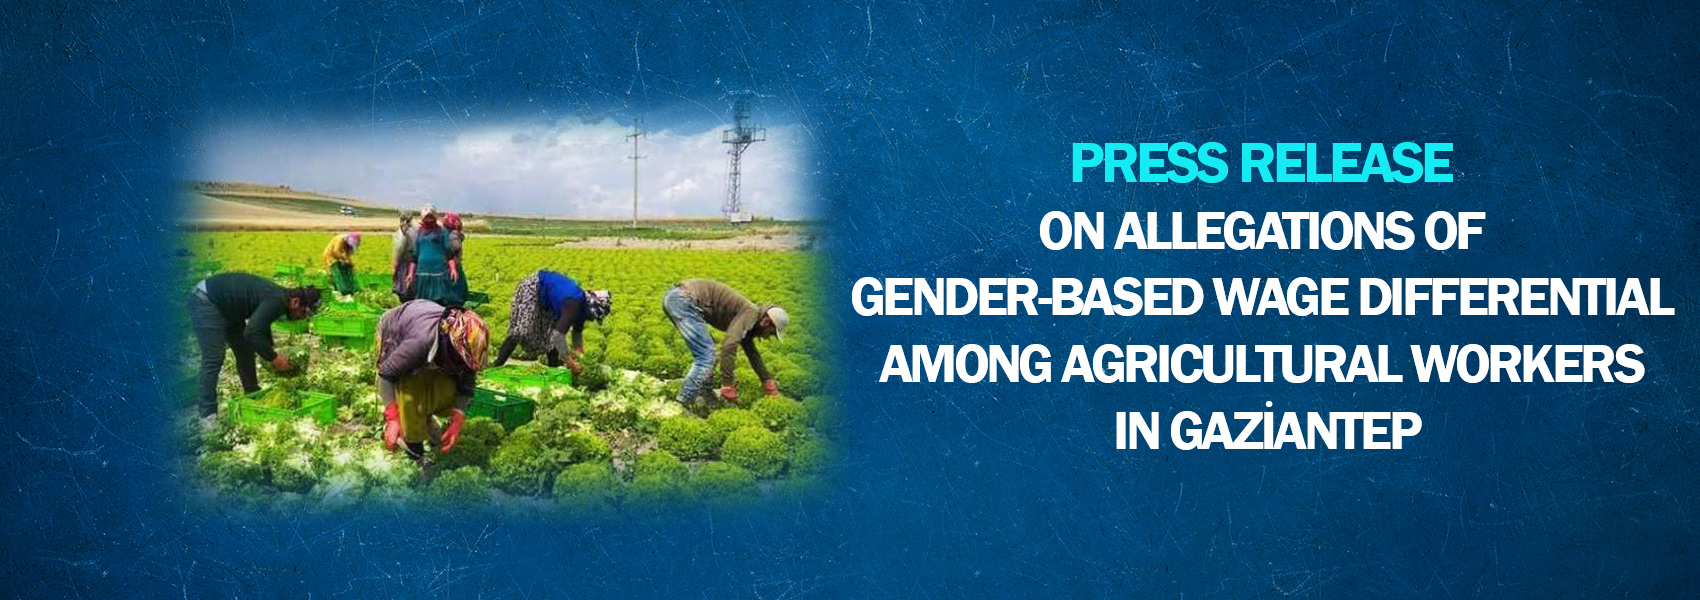 Press Release on Allegations of Gender-Based Wage Differential Among Agricultural Workers in Gaziantep